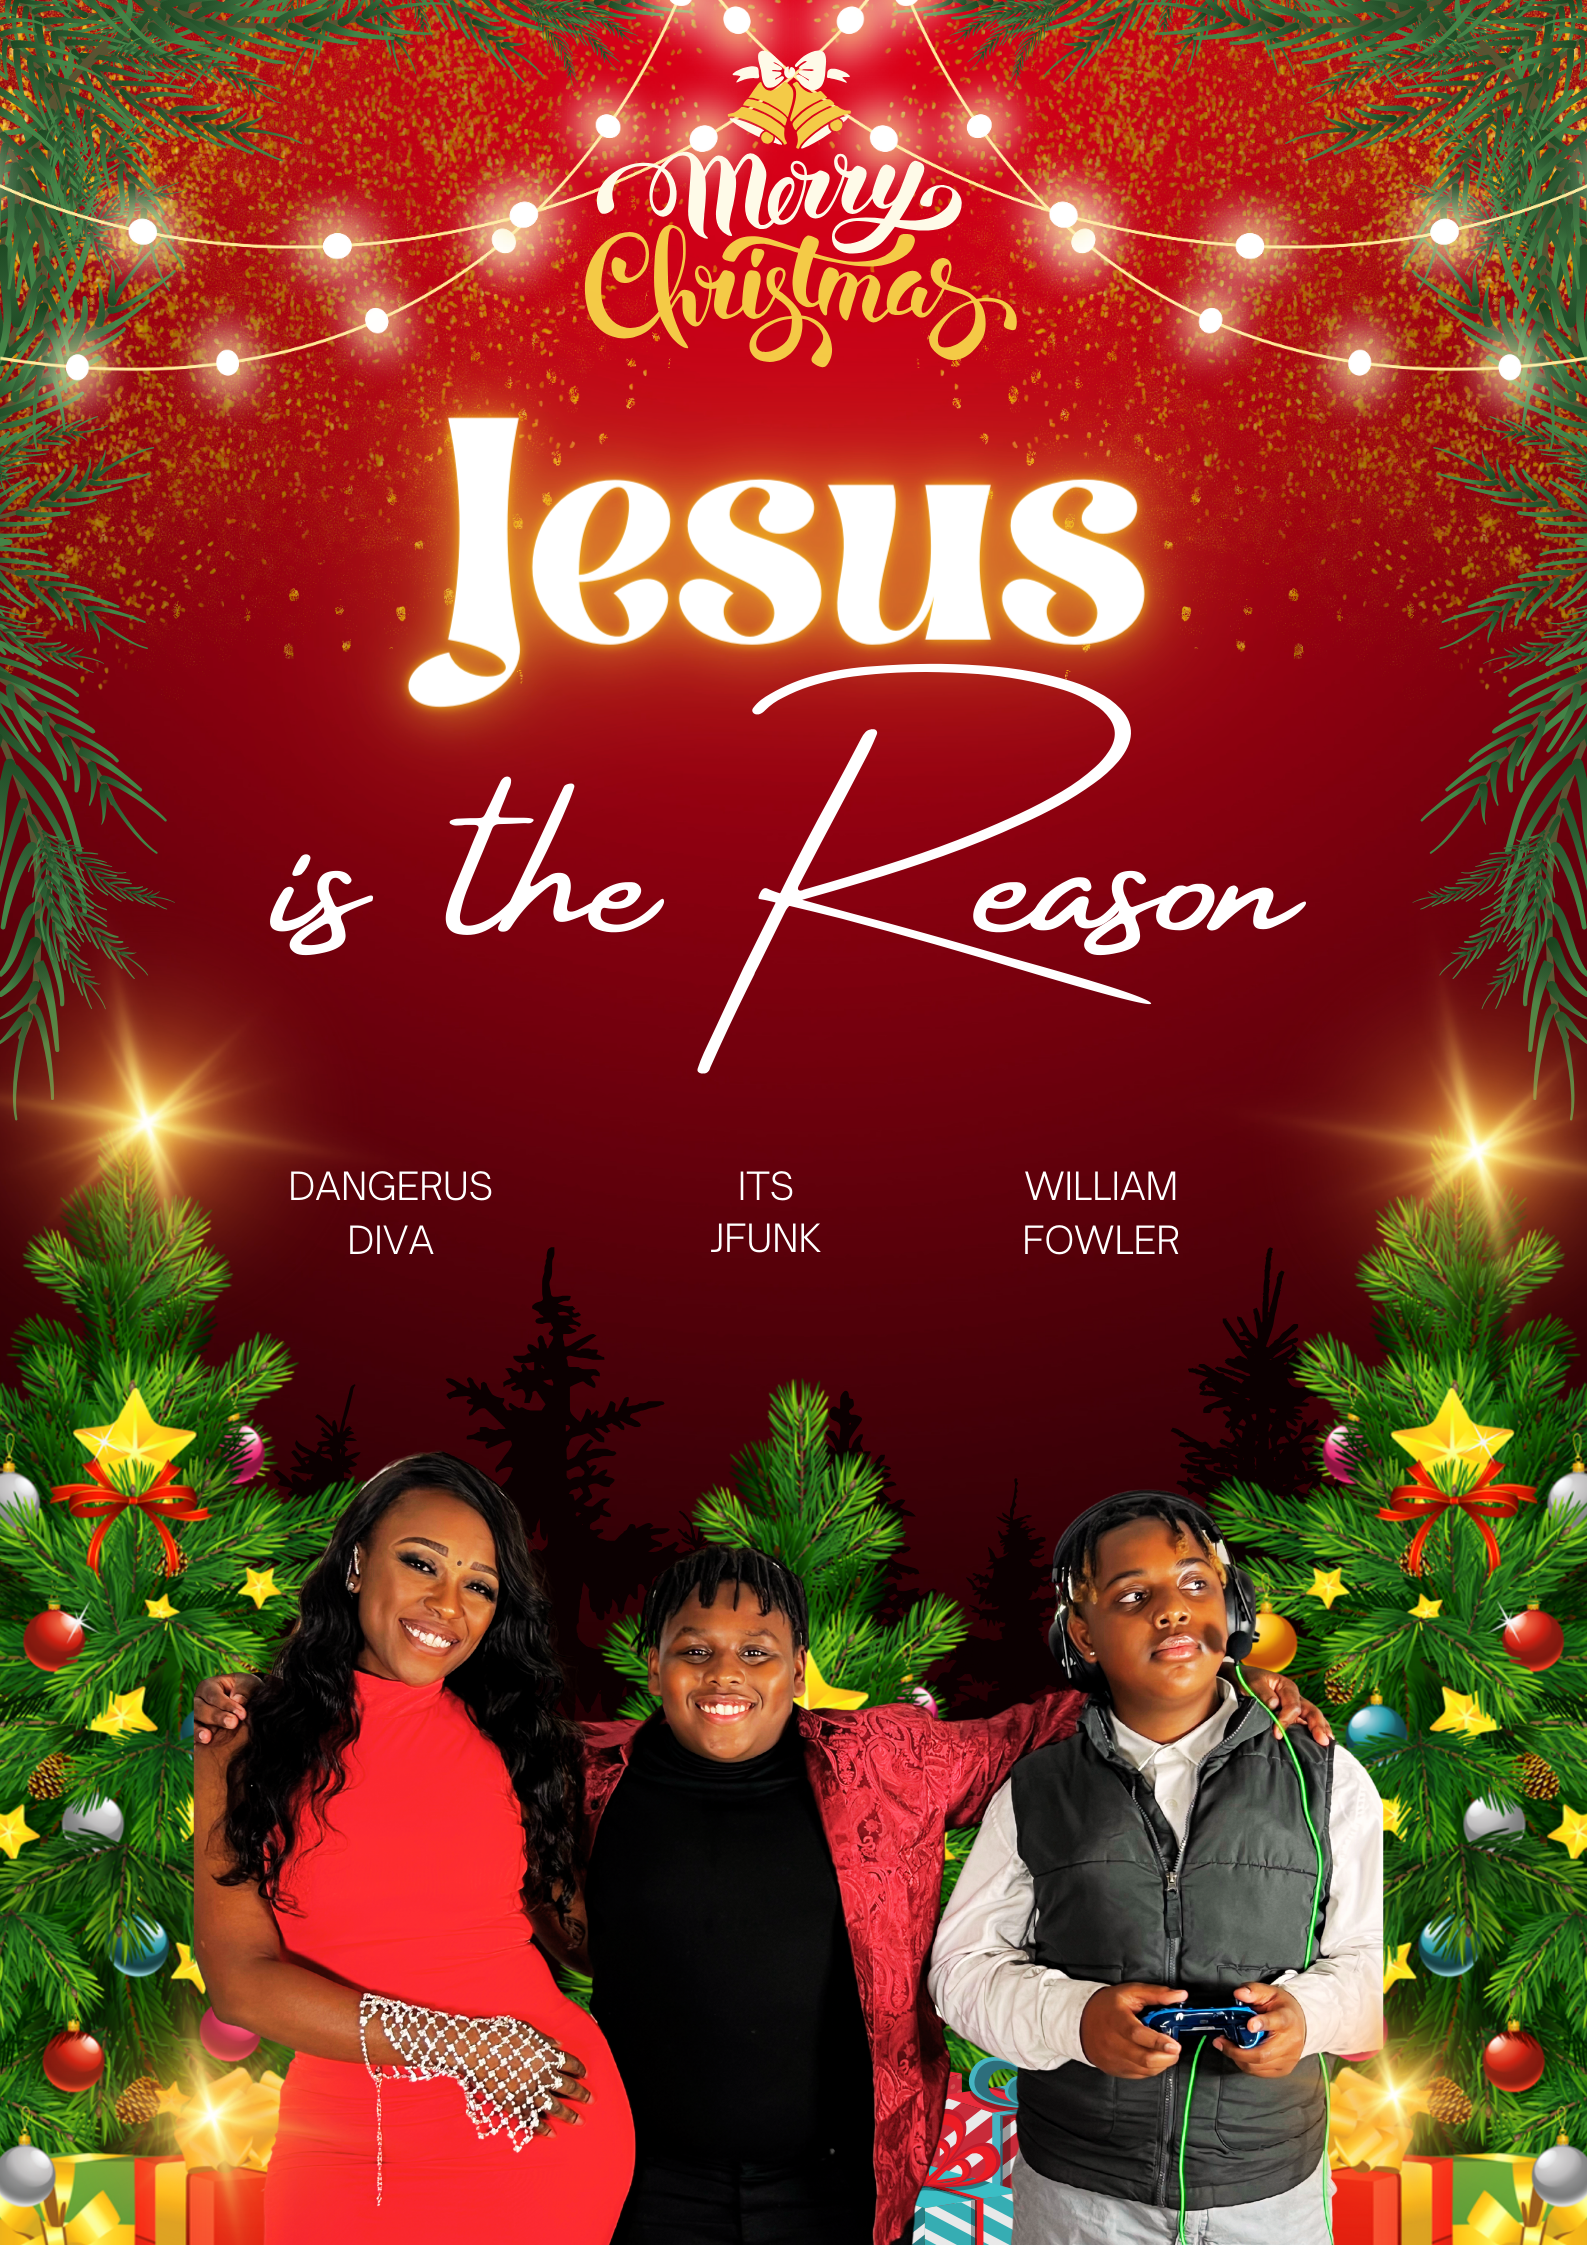 Jesus is the Reason a TBT Christmas Musical